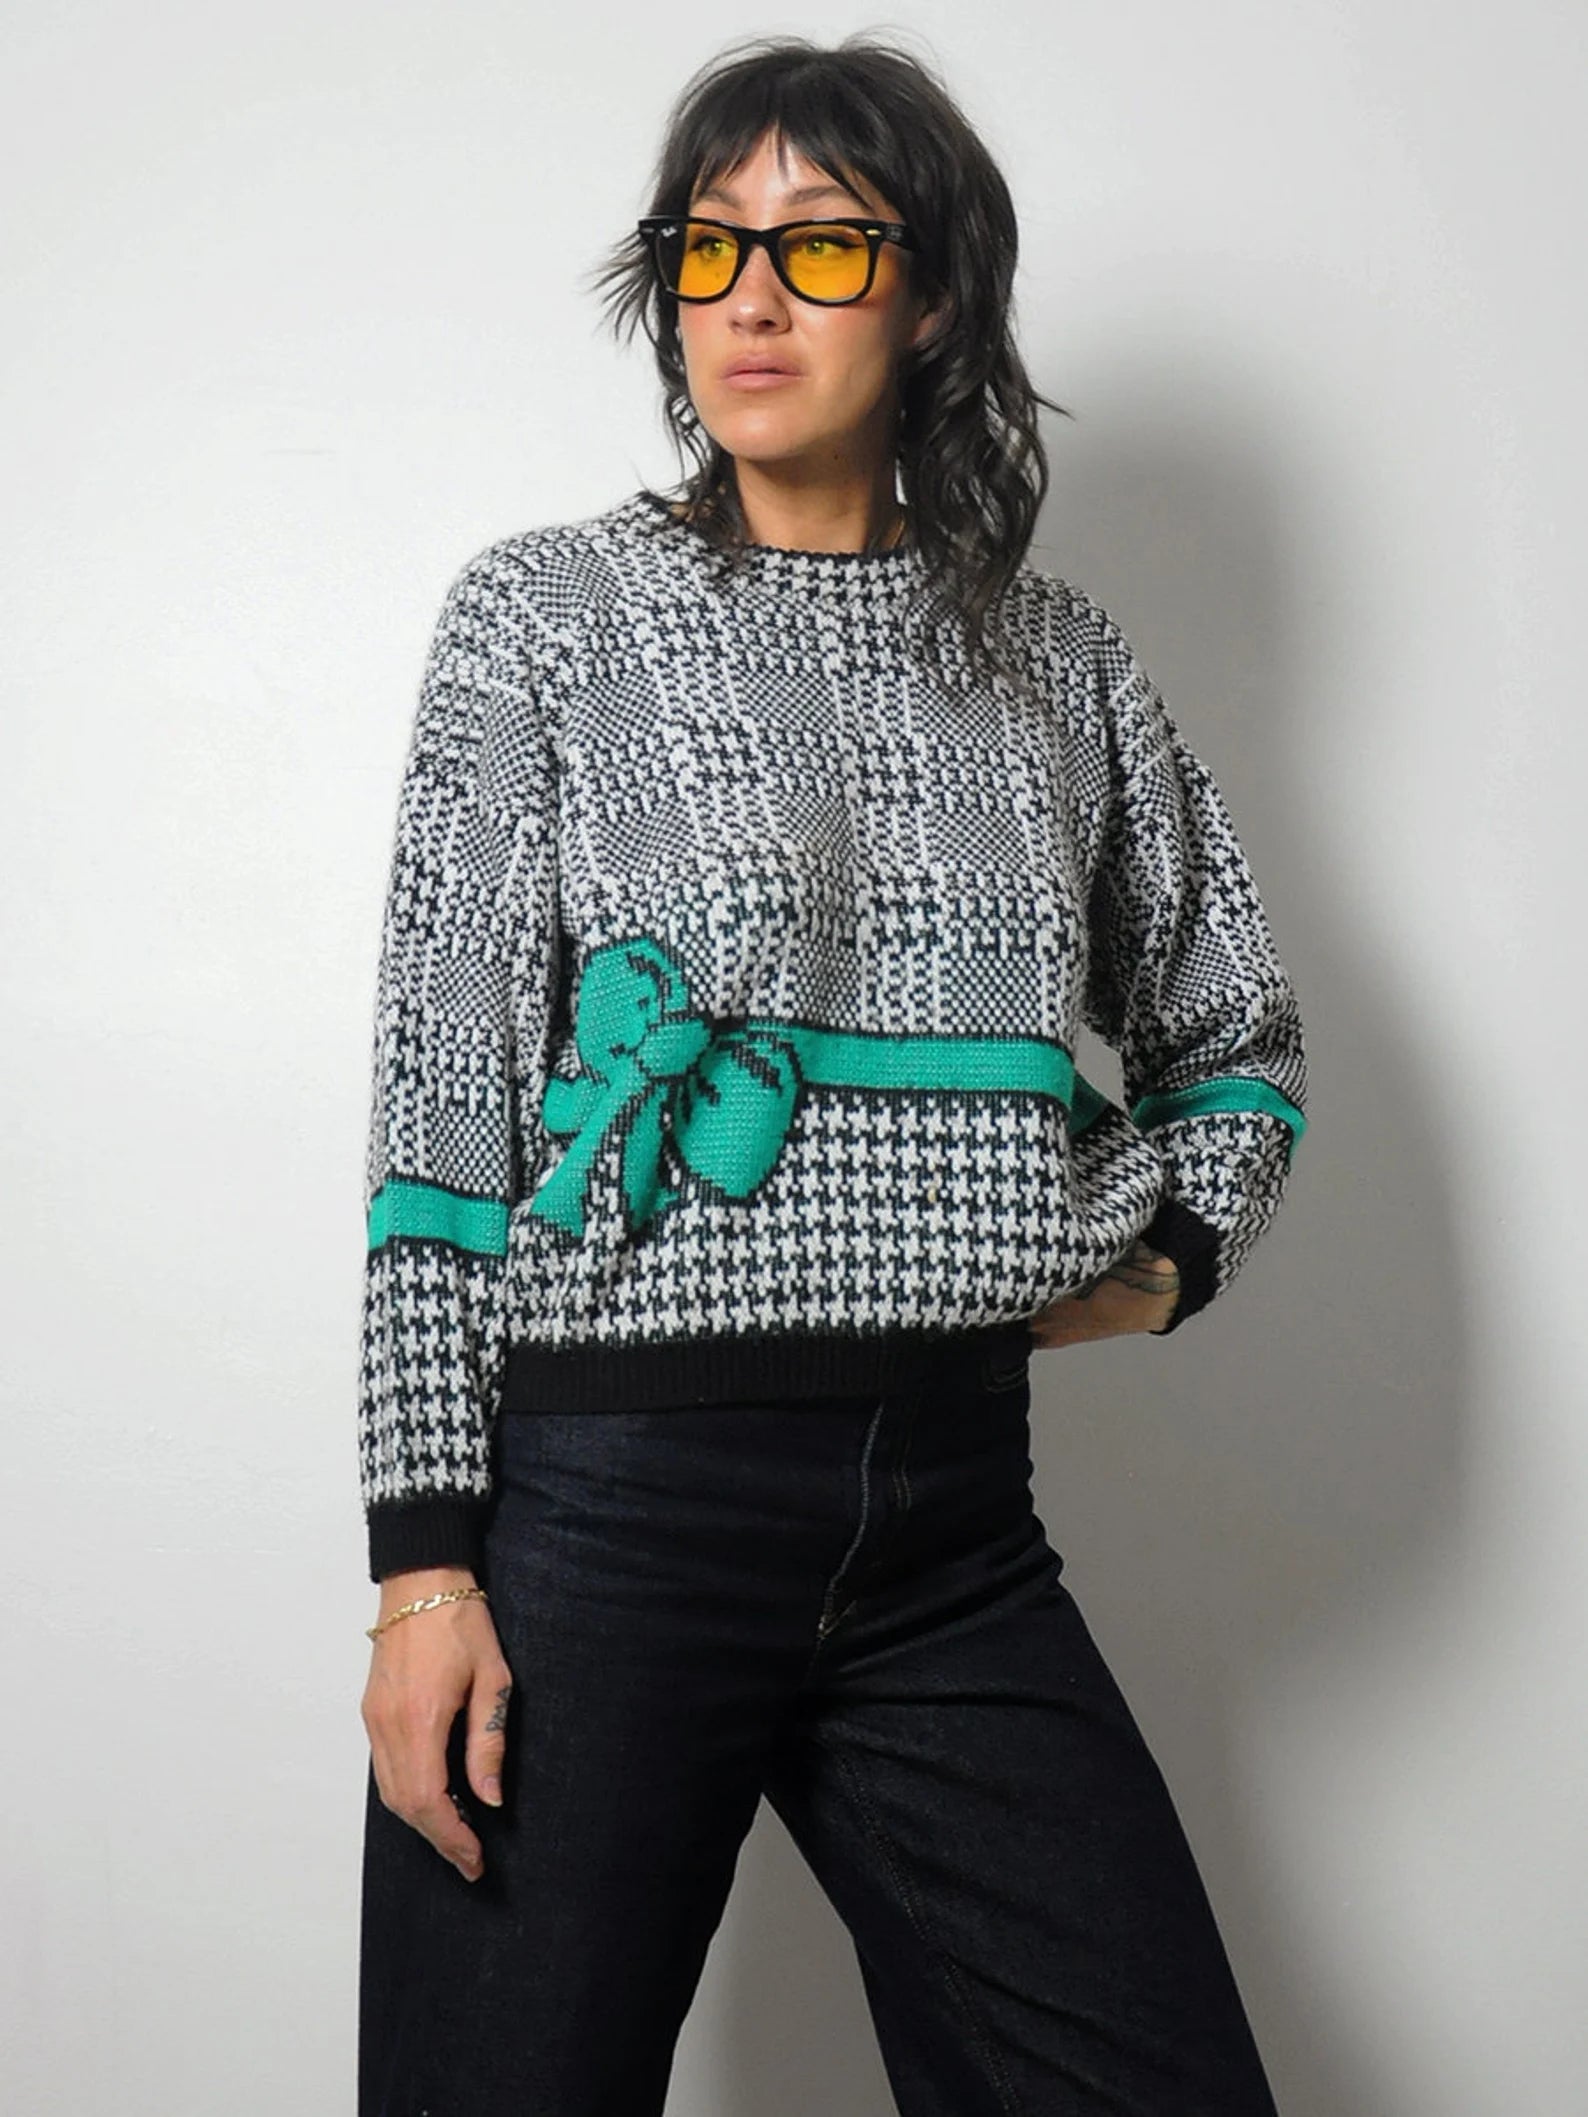 1980's Houndstooth Bow Sweater